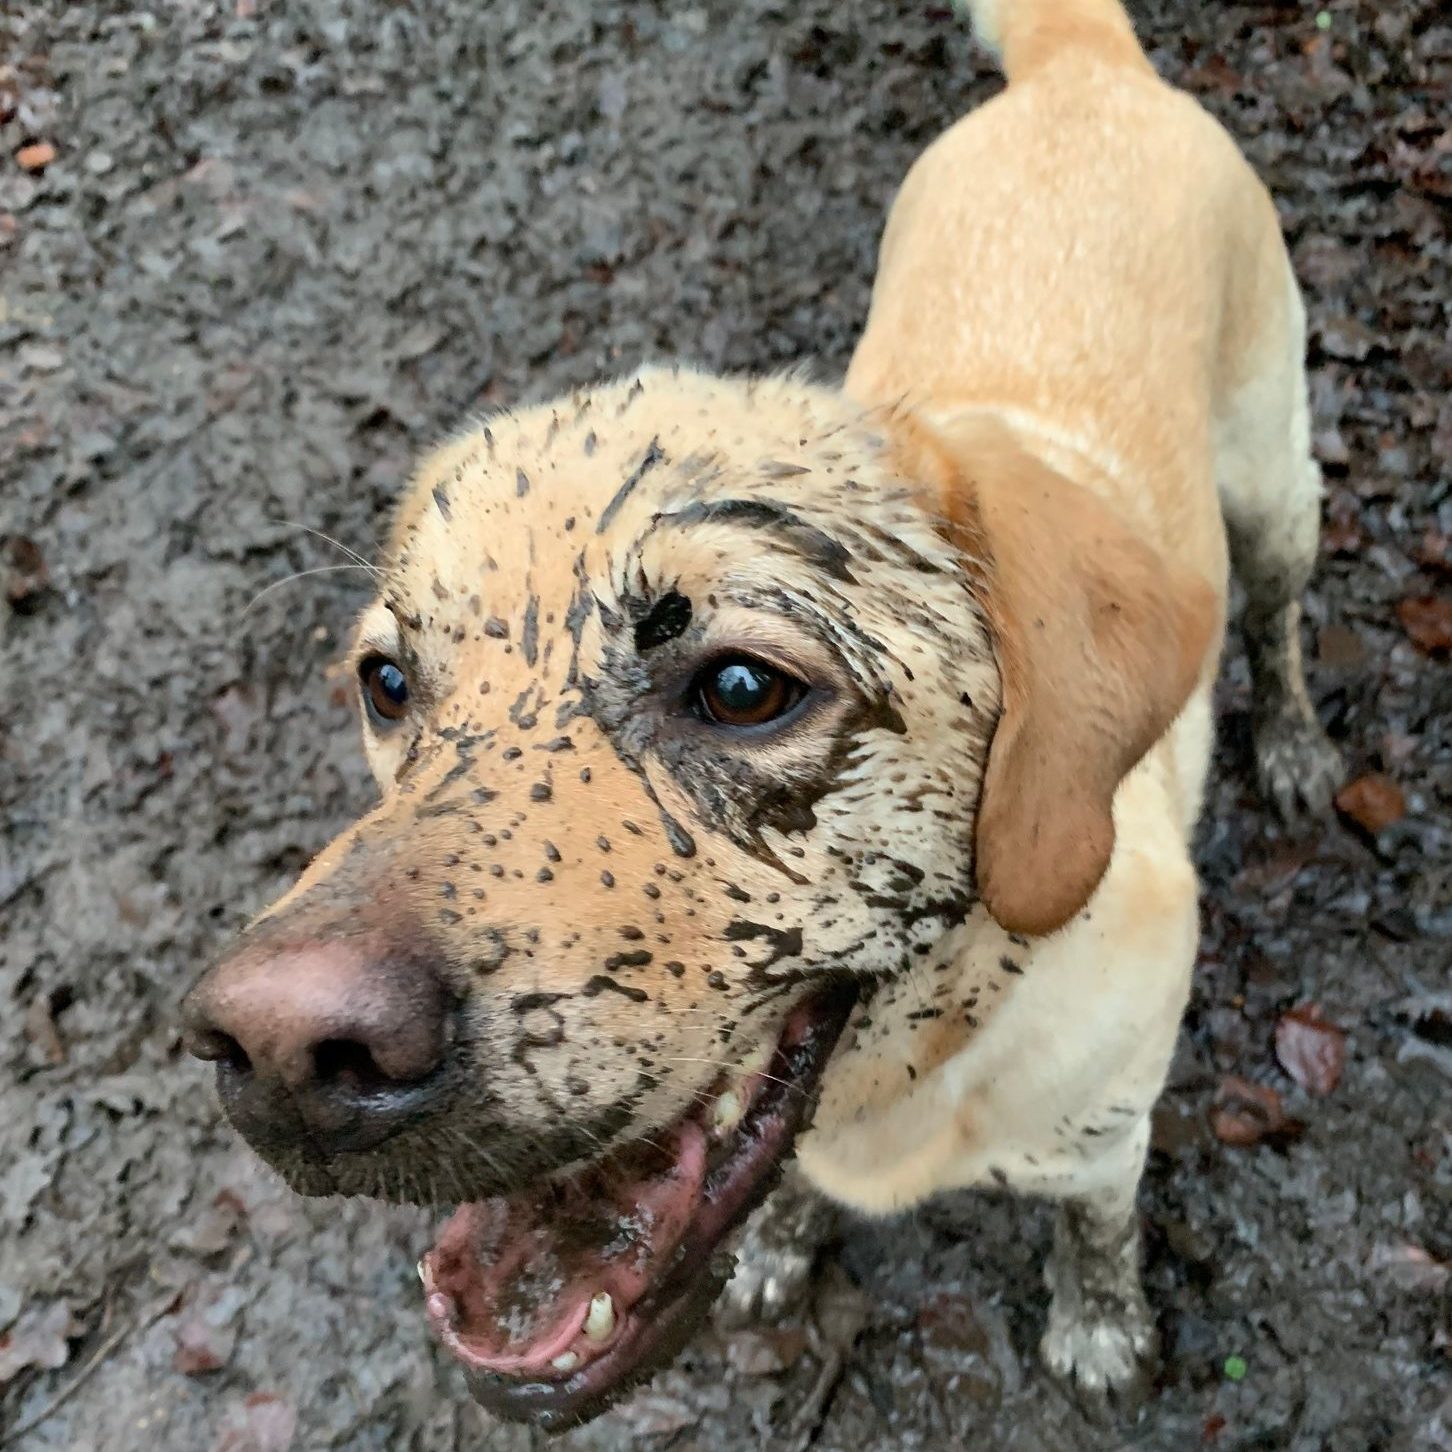 A mud-covered Dogs for Good golden Labrador looking up at the camera, mouth open.